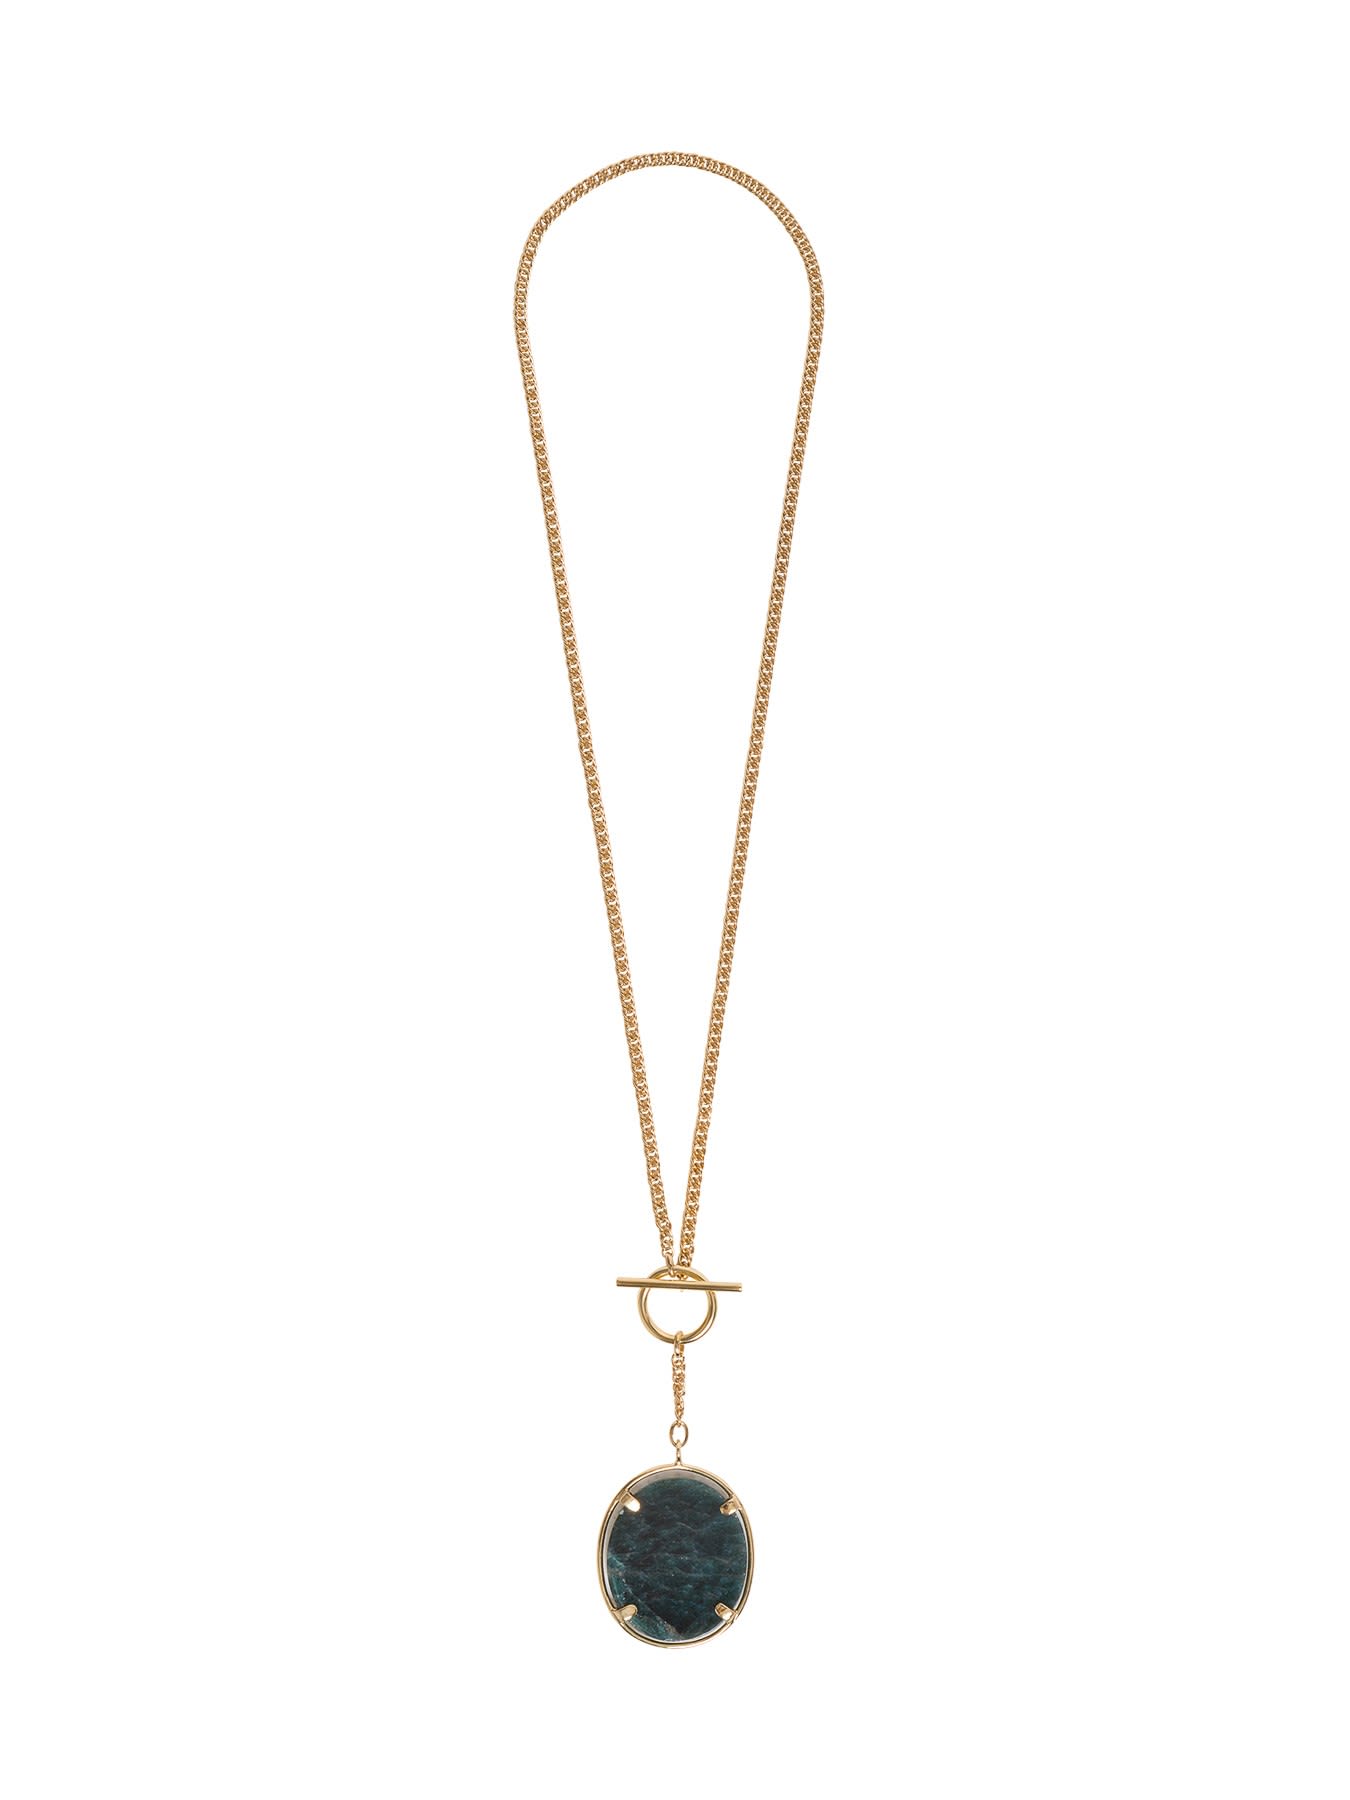 Isabel Marant Necklace With Pendant